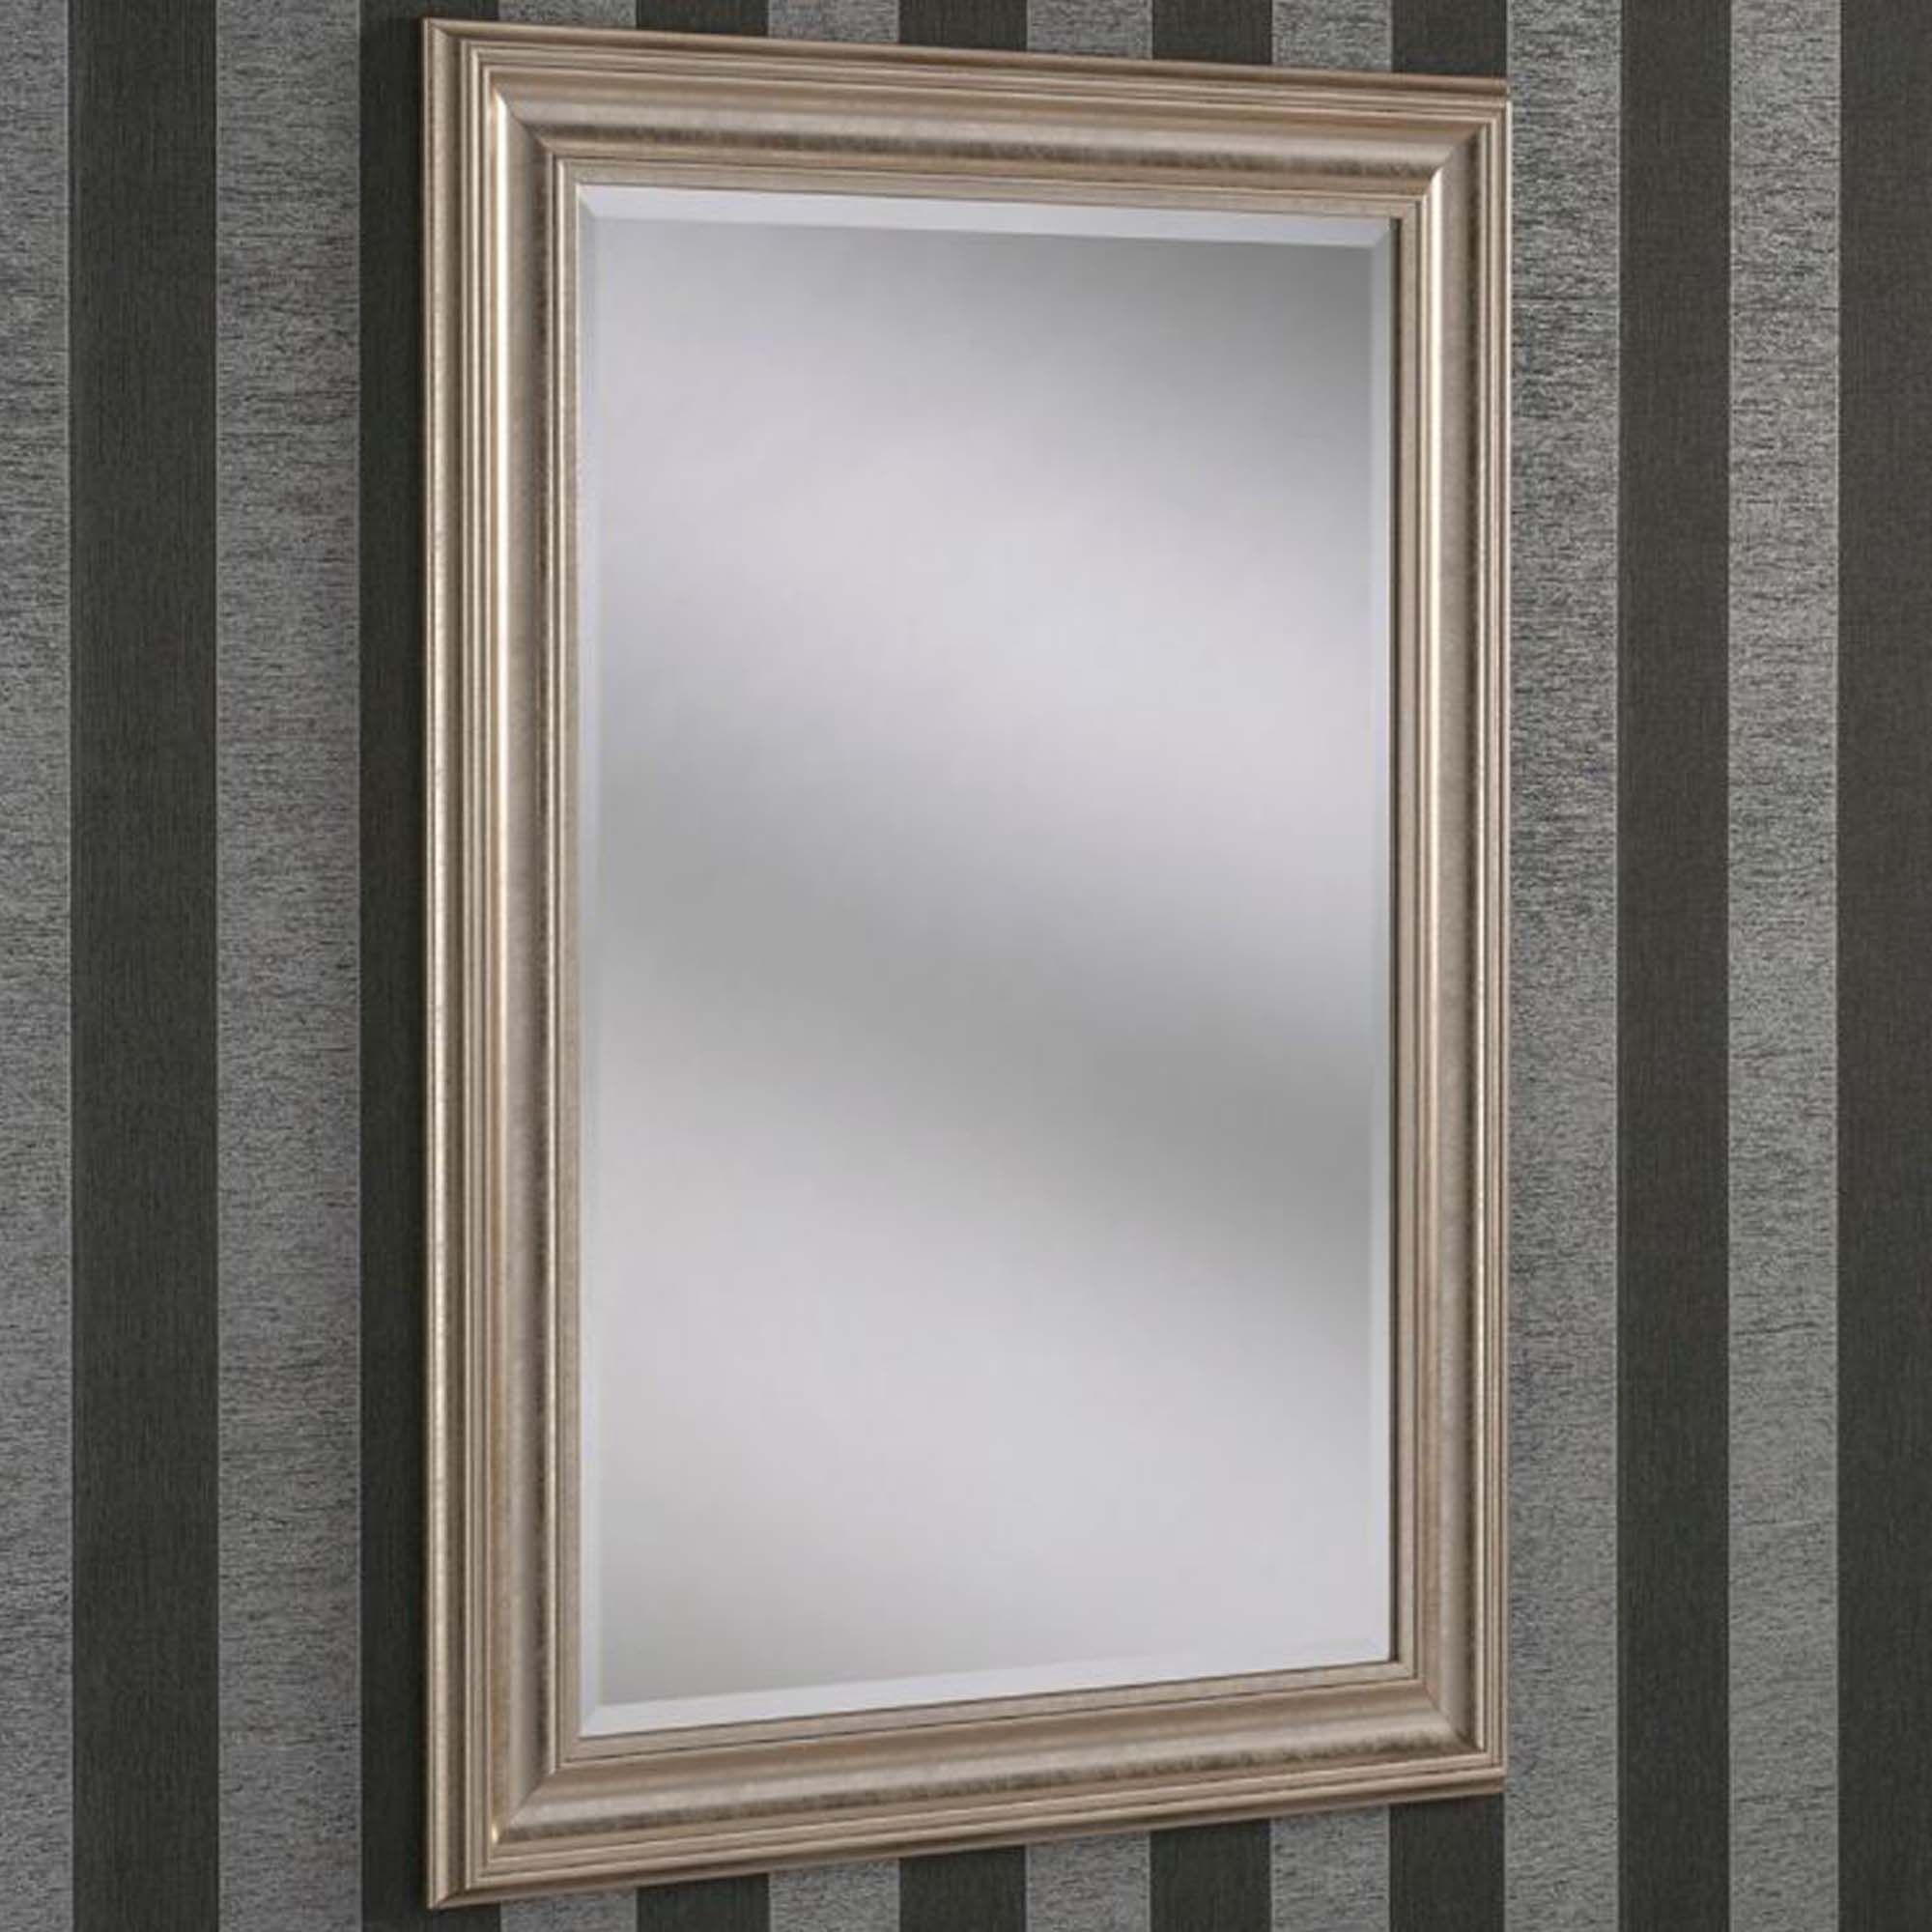 Decorative Champagne Rectangular Wall Mirror | Homesdirect365 With Regard To Reba Accent Wall Mirrors (View 13 of 15)